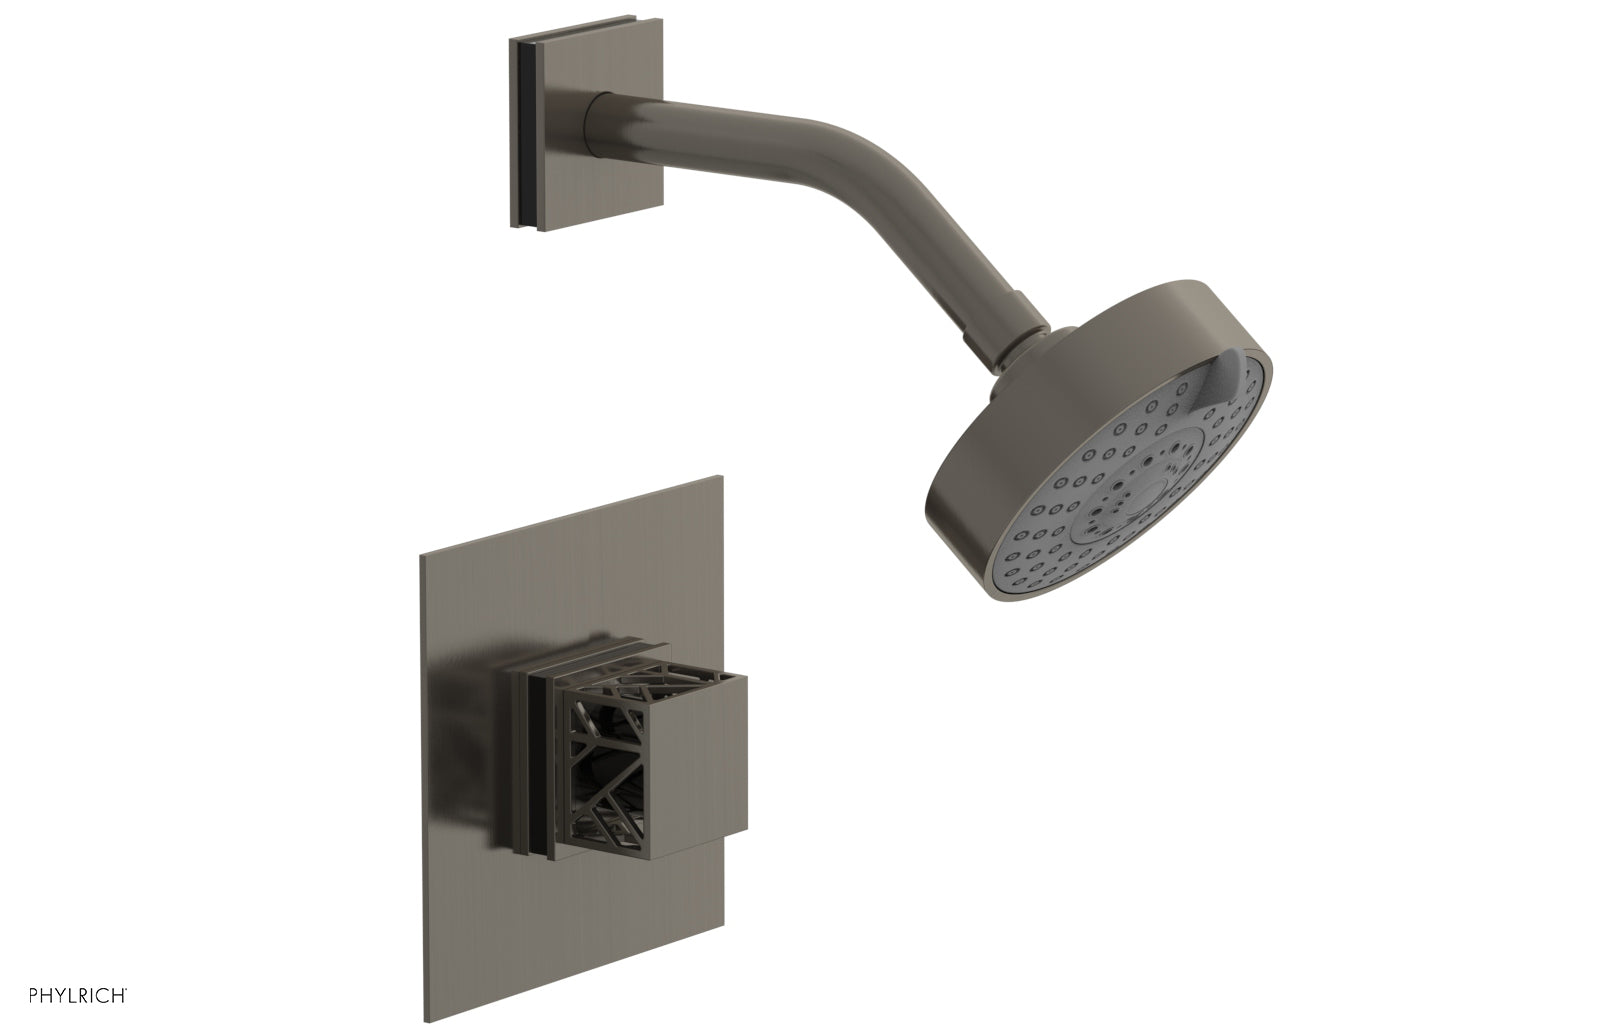 Phylrich JOLIE Pressure Balance Shower Set - Square Handle with "Black" Accents